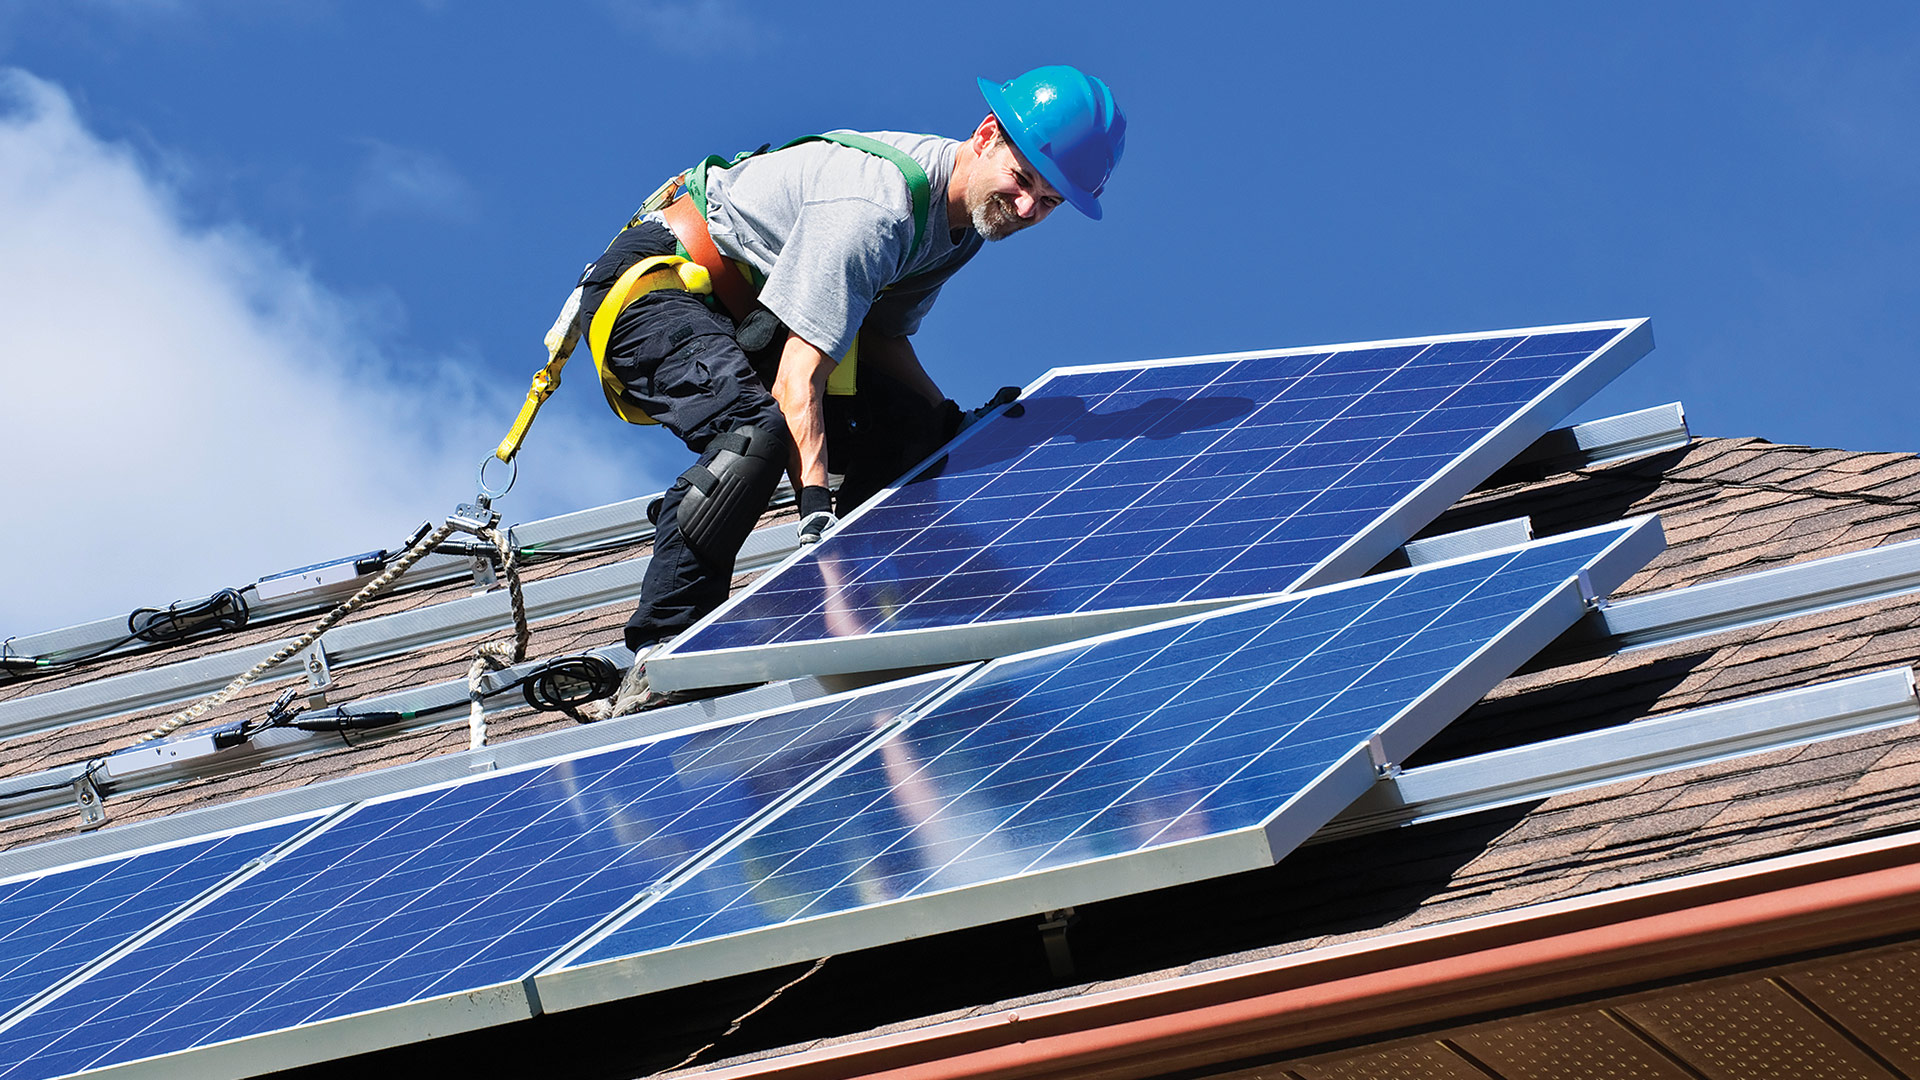 UMassFive has developed a strong niche in the financing of solar-installation projects.